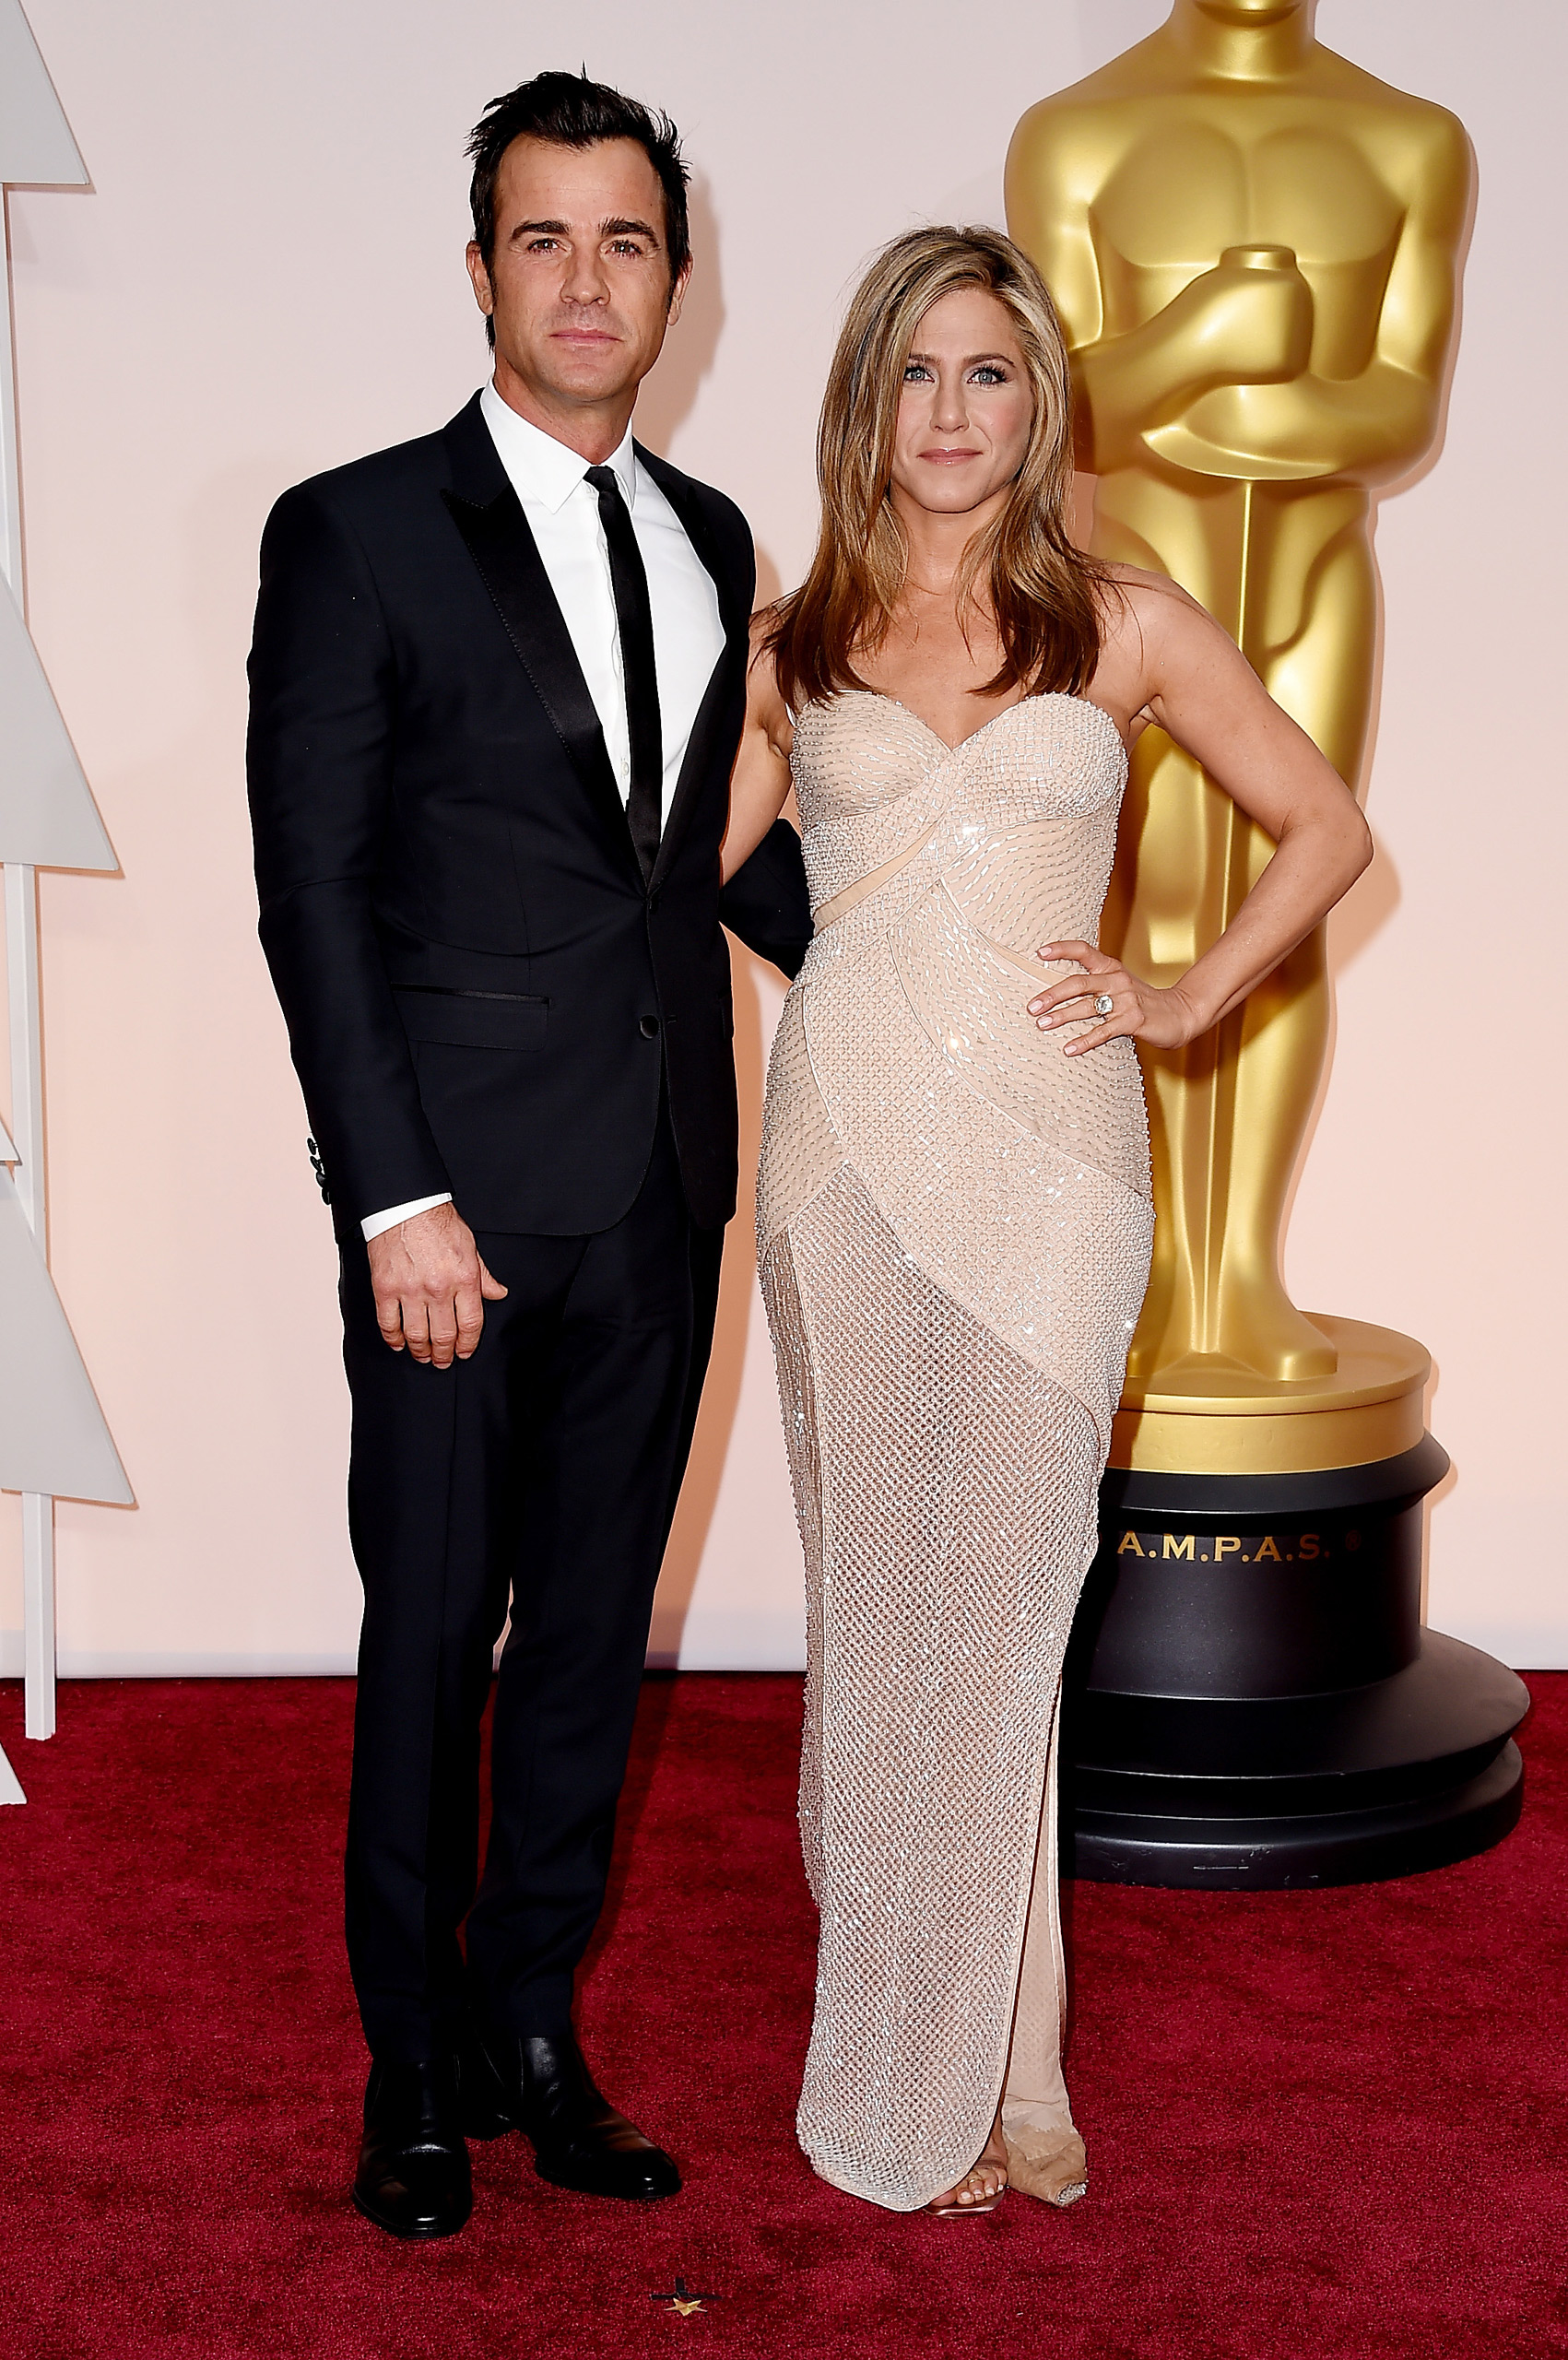 Justin Theroux and Jennifer Aniston attend the 87th Annual Academy Awards on Feb. 22, 2015 in Hollywood, Calif.